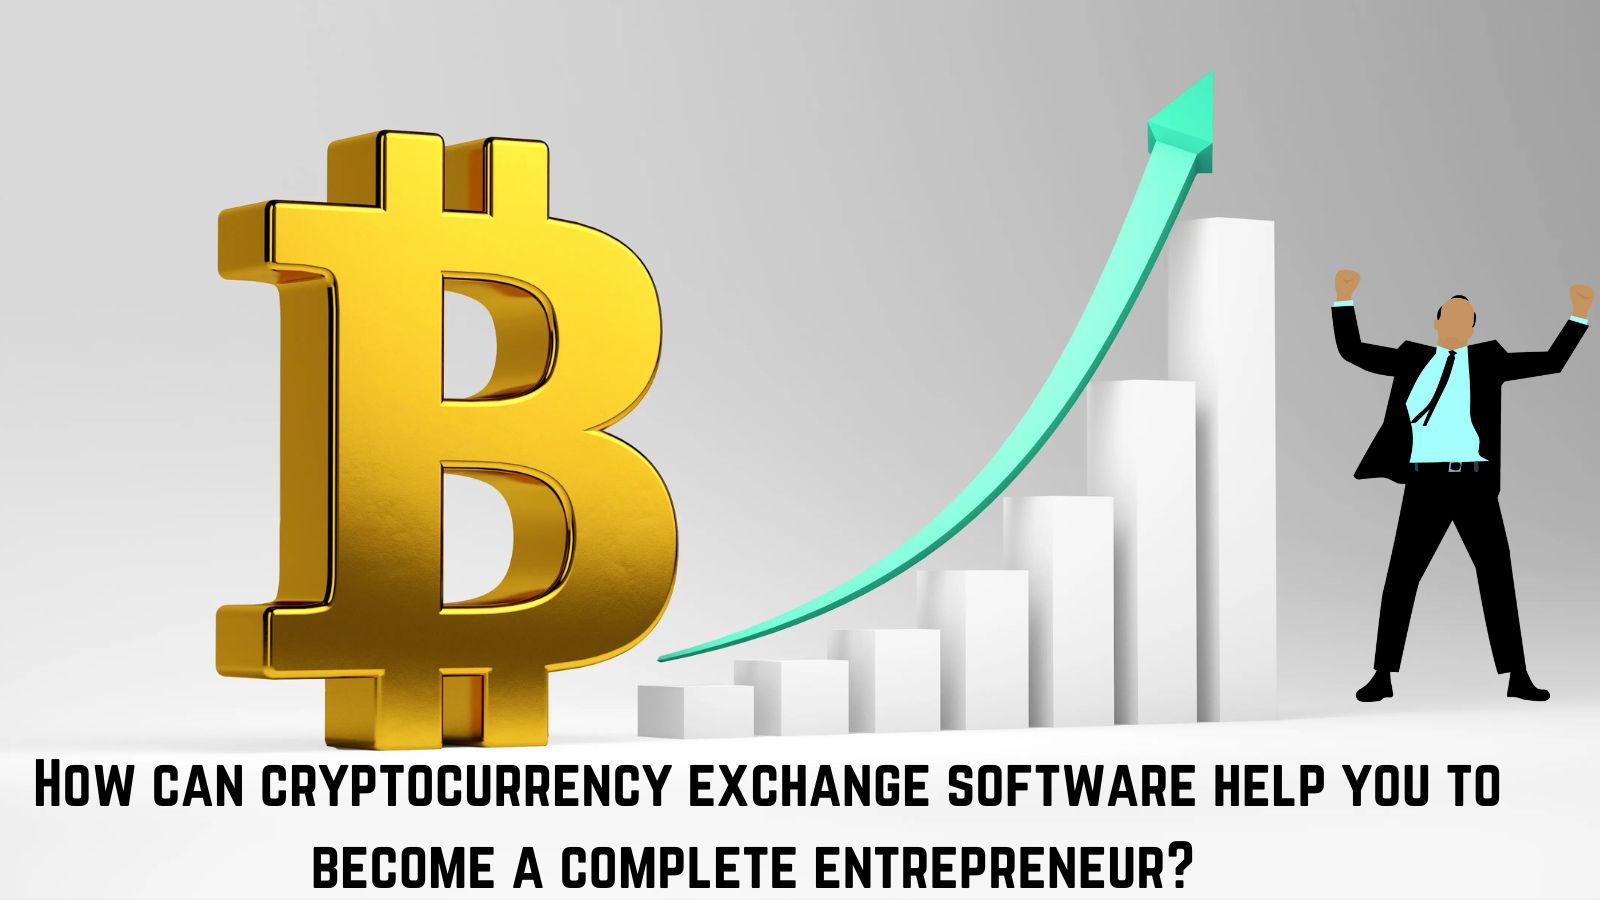 How can cryptocurrency exchange software help you to become a complete entrepreneur?